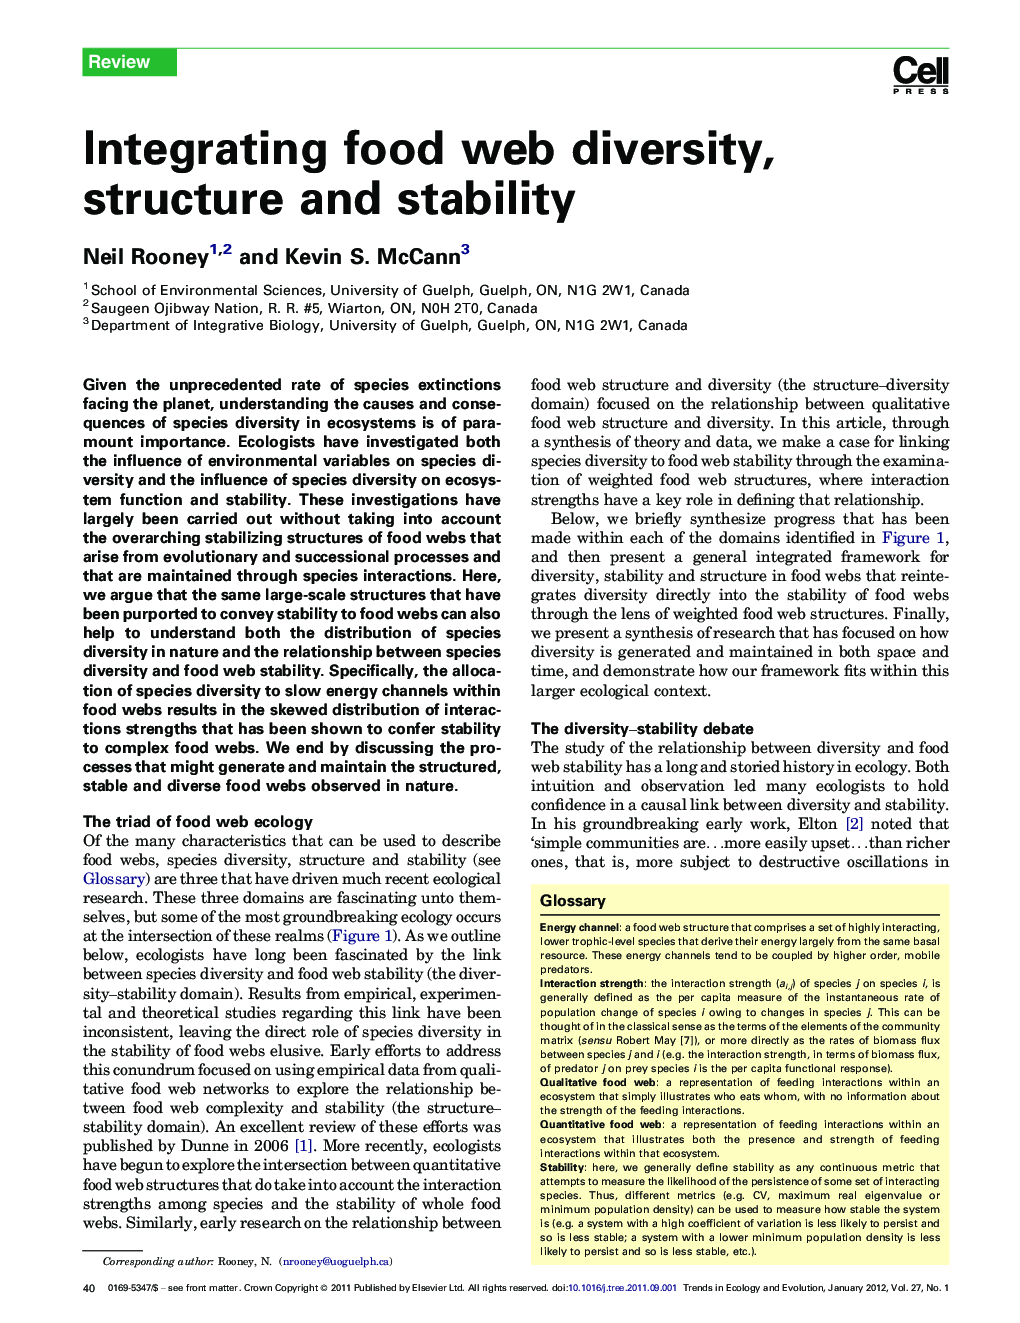 Integrating food web diversity, structure and stability